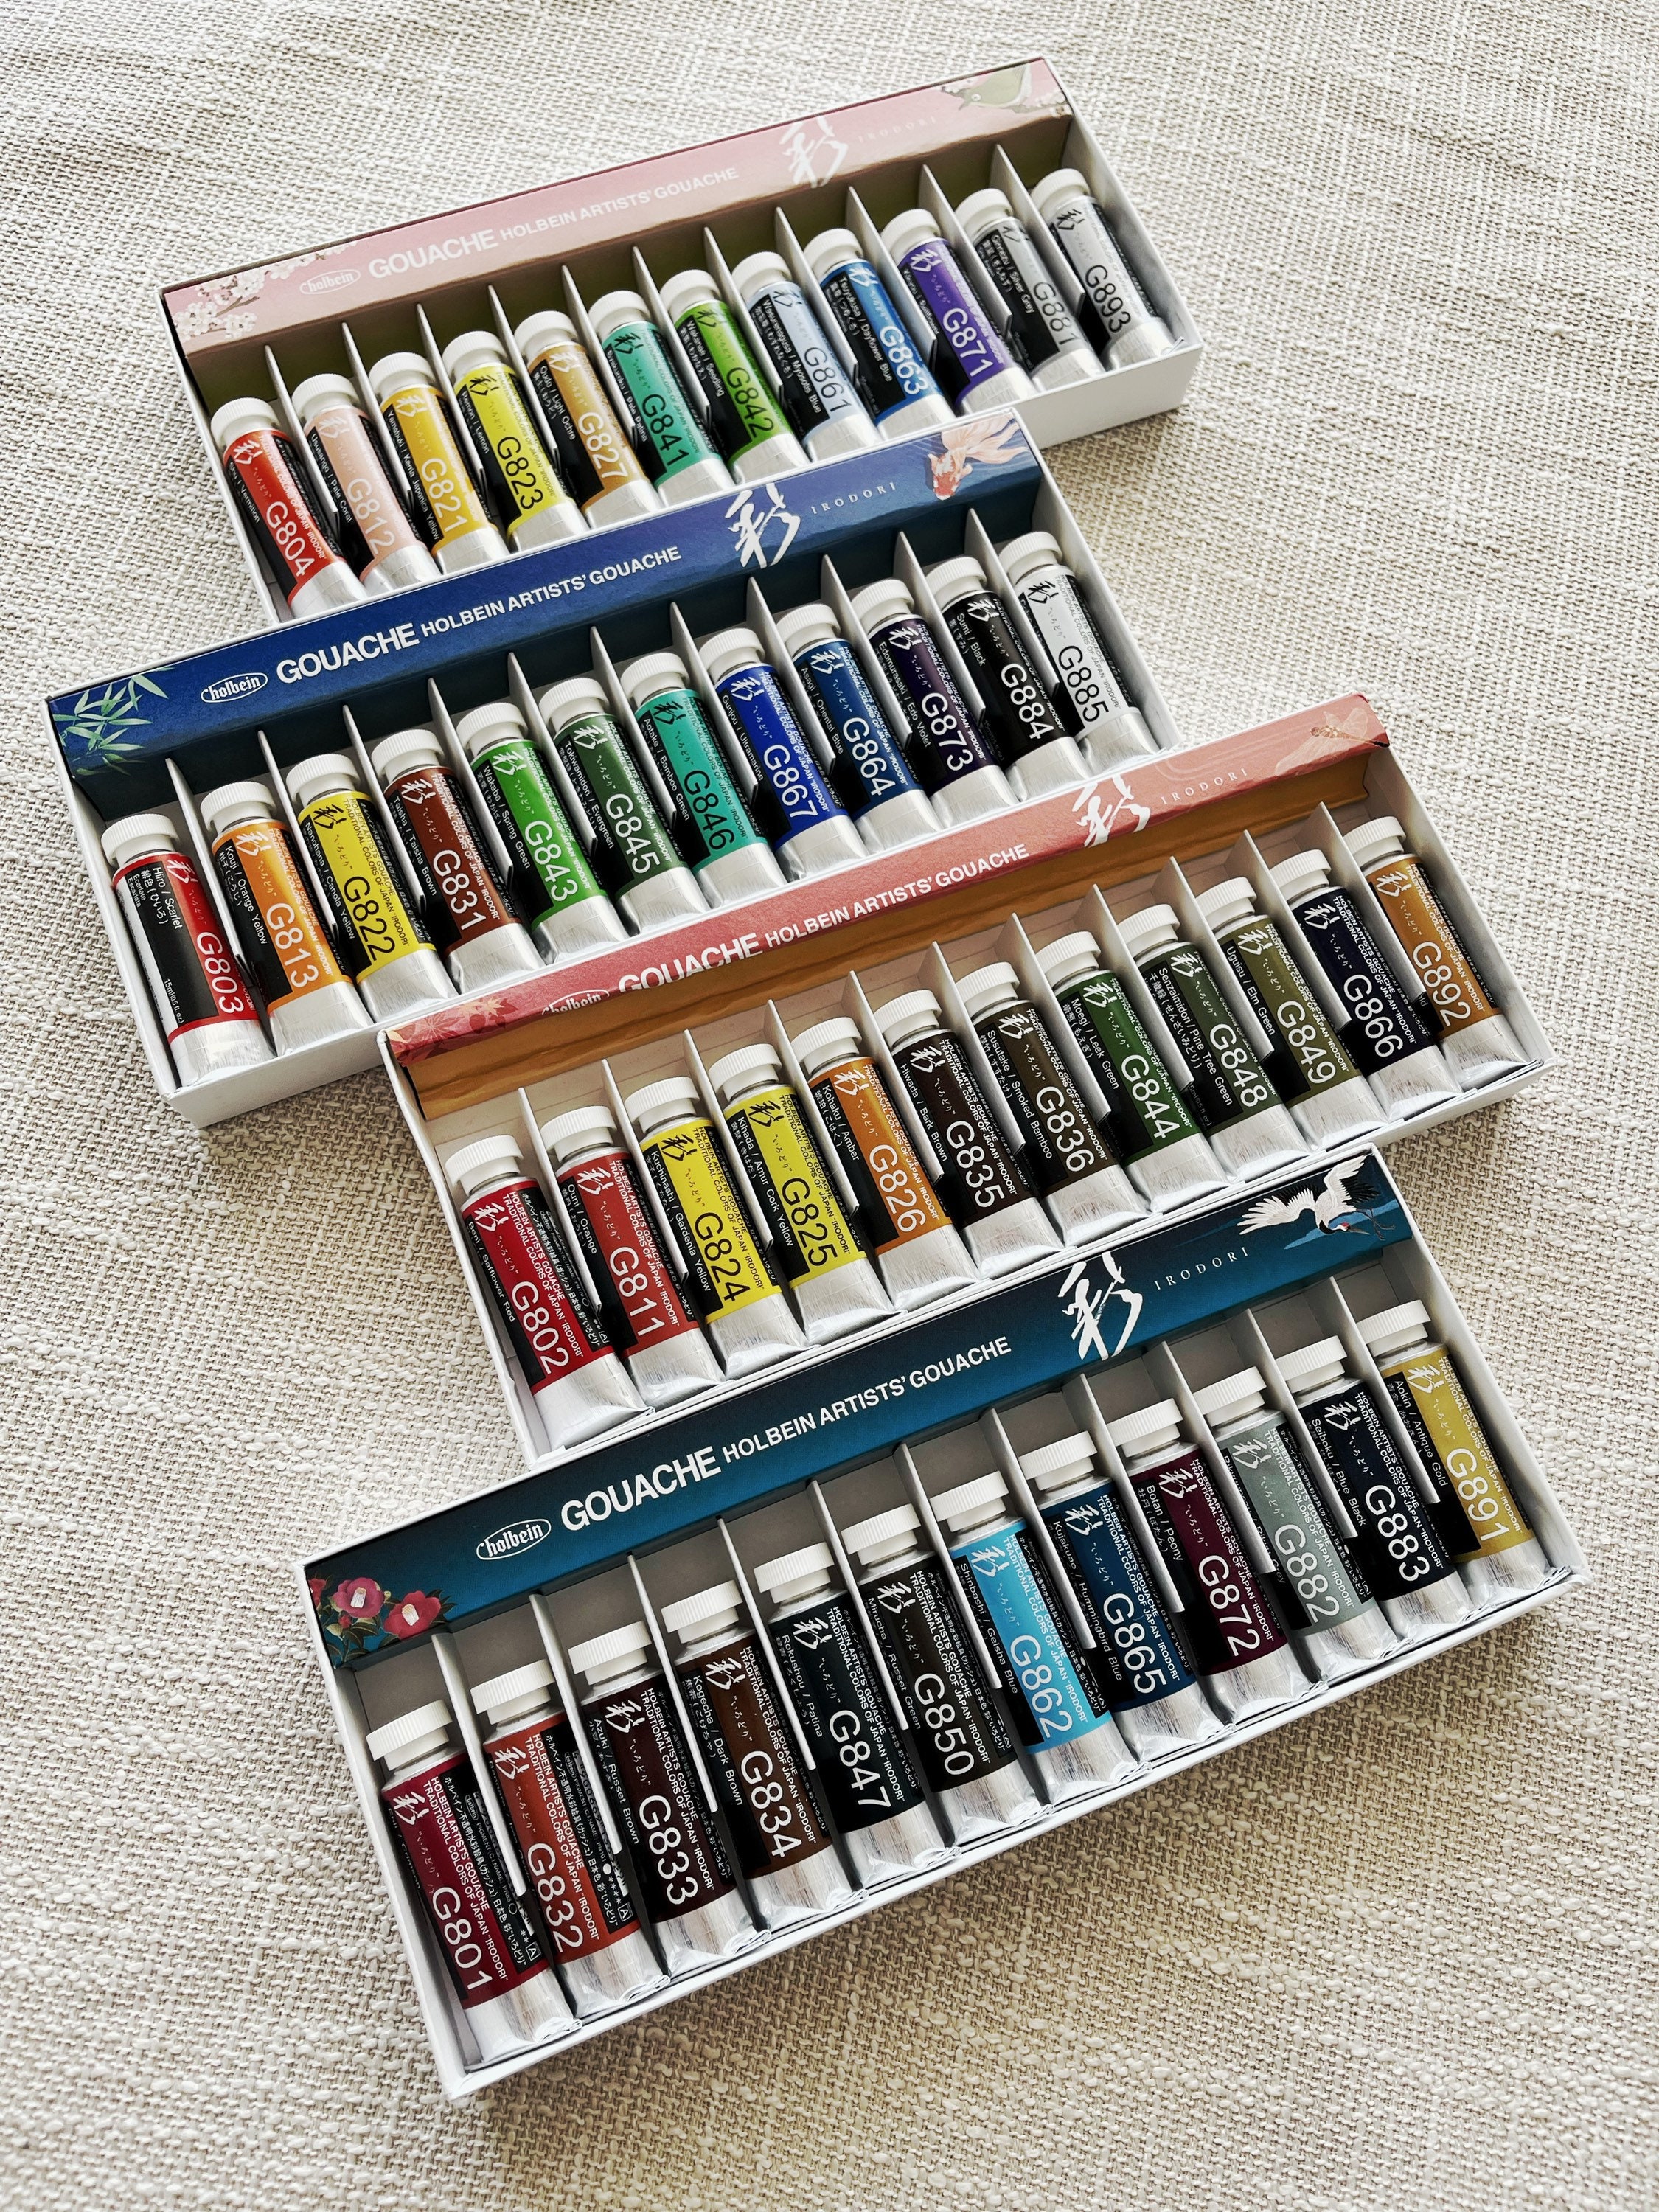 Holbein artists' gouache traditional colours of Japan/4 seasons 48 gouache  paint samples